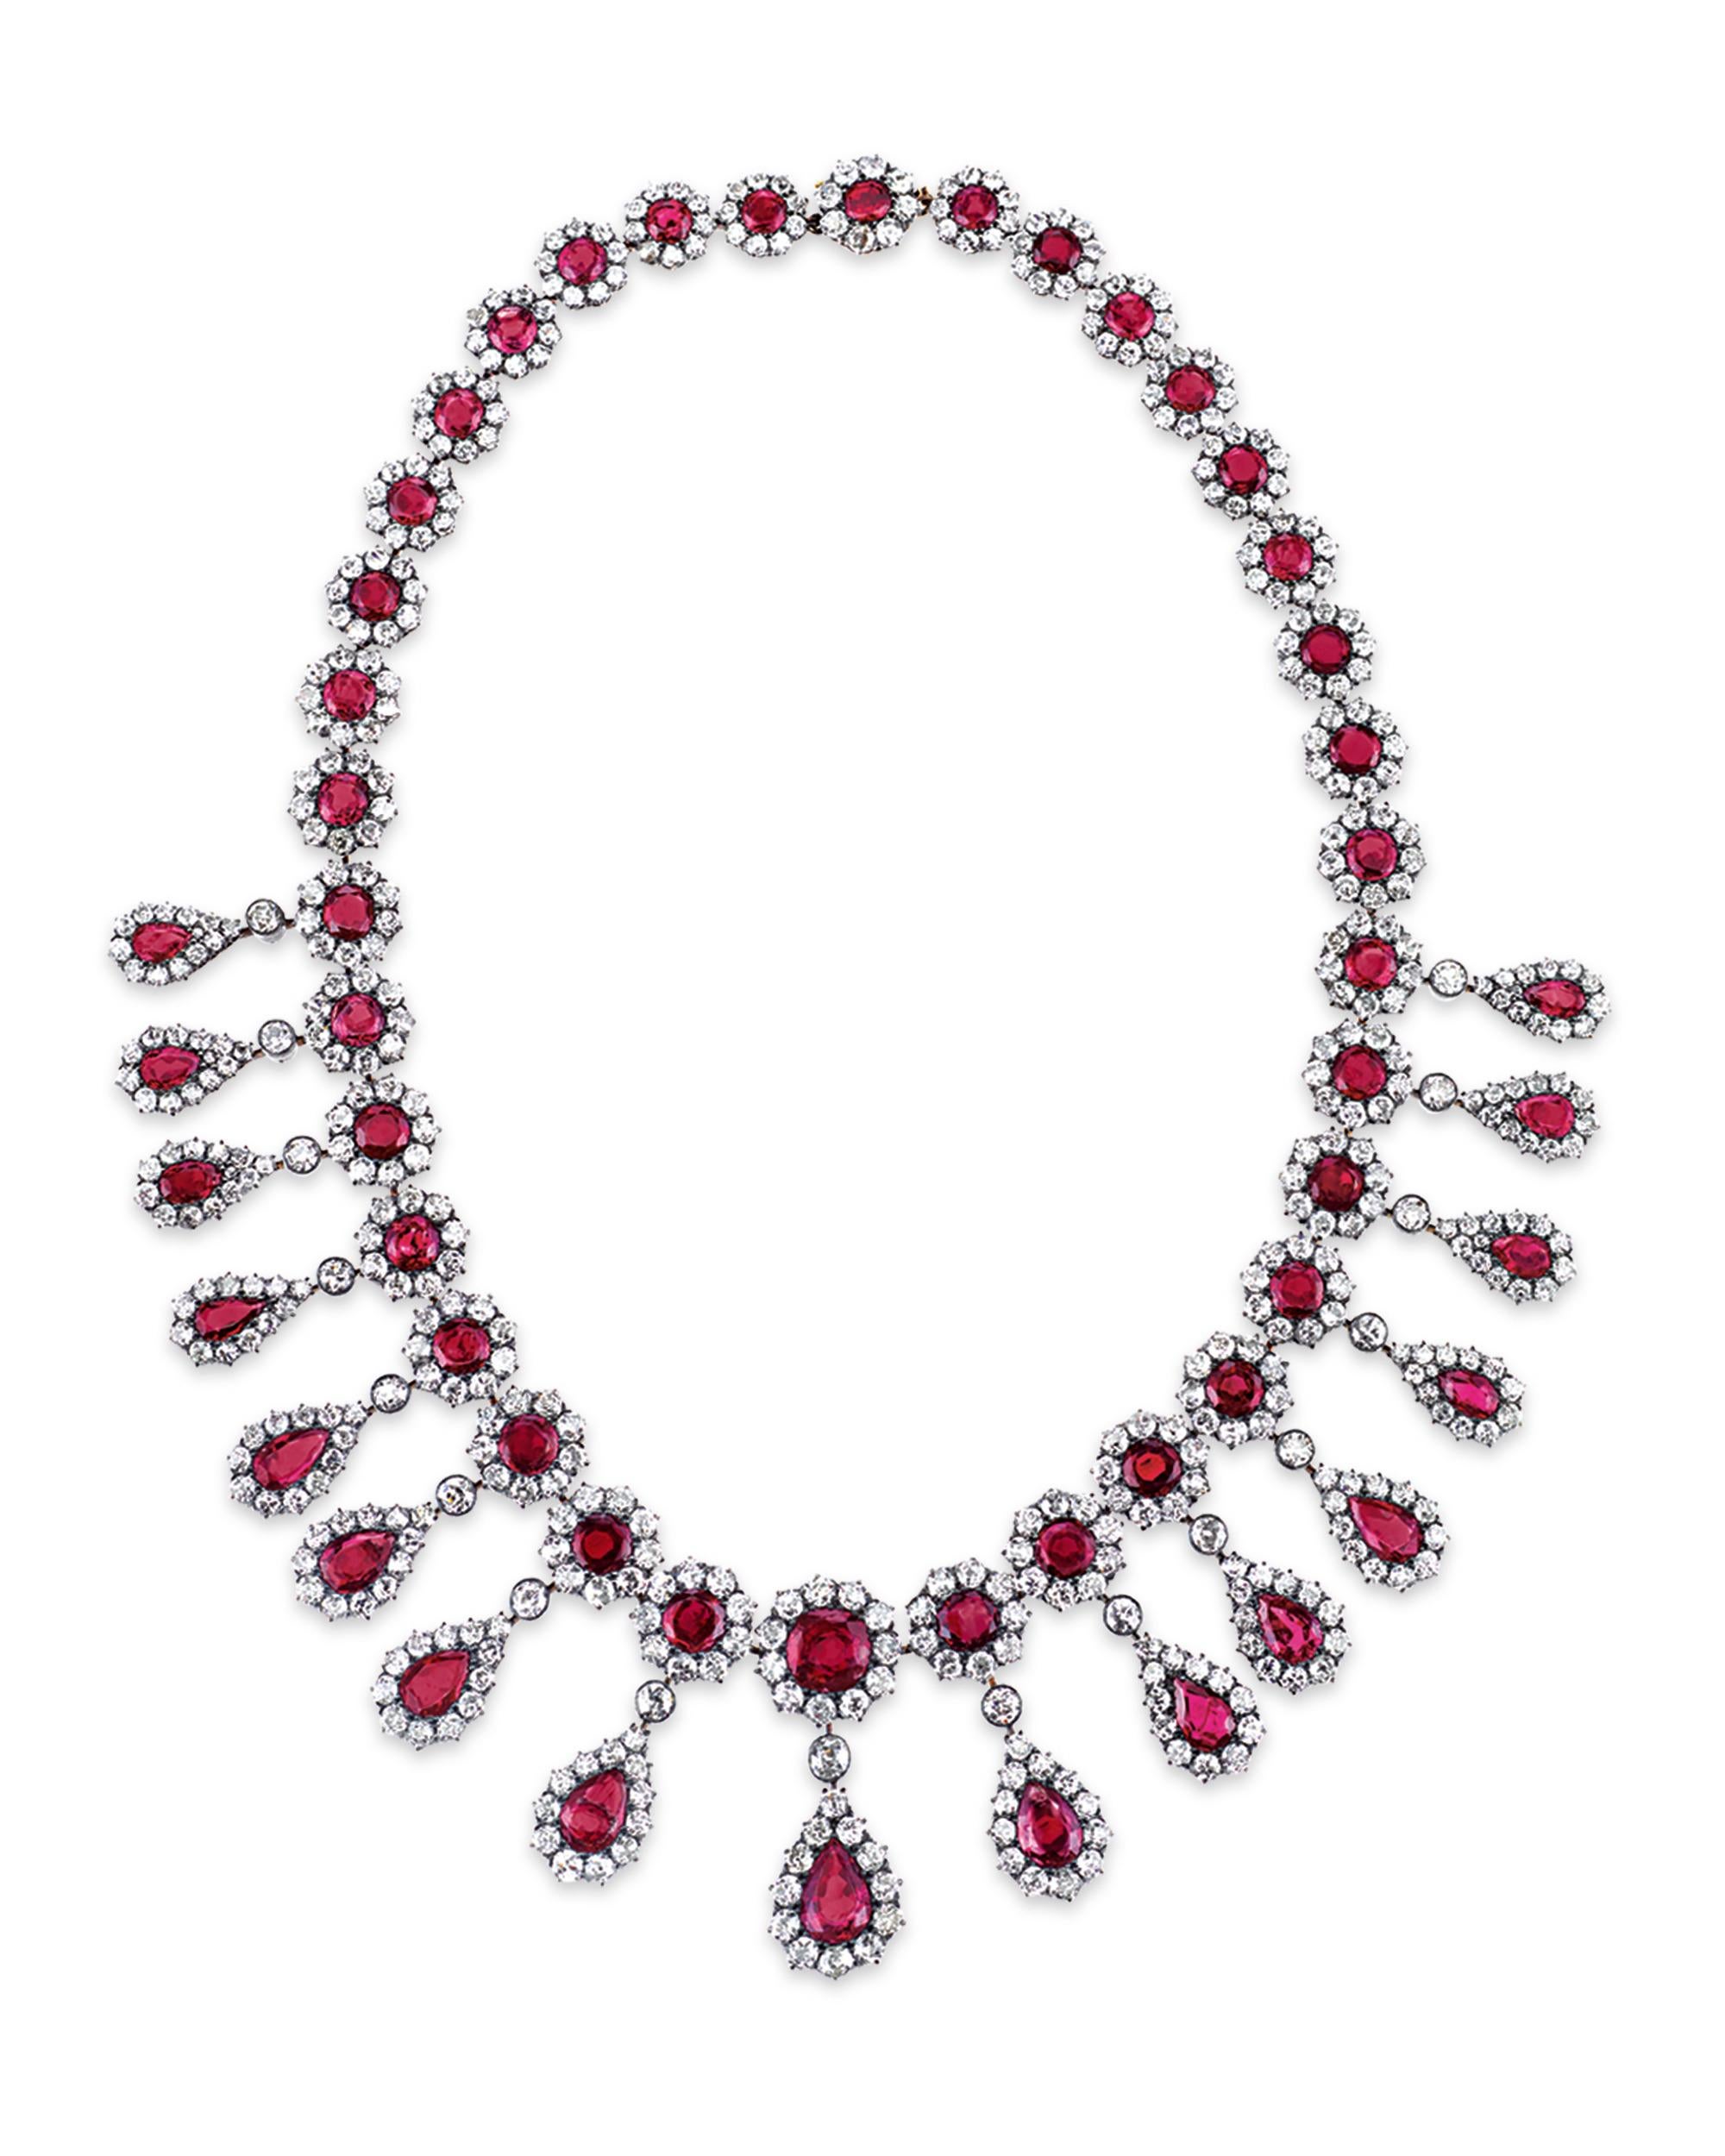 Sumptuous Burma rubies and vibrant white diamonds come together in this sensational antique necklace. Featuring a remarkable red hue, the Burma rubies total approximately 50 carats, while the diamonds that encircle them weigh a combined 30 carats.